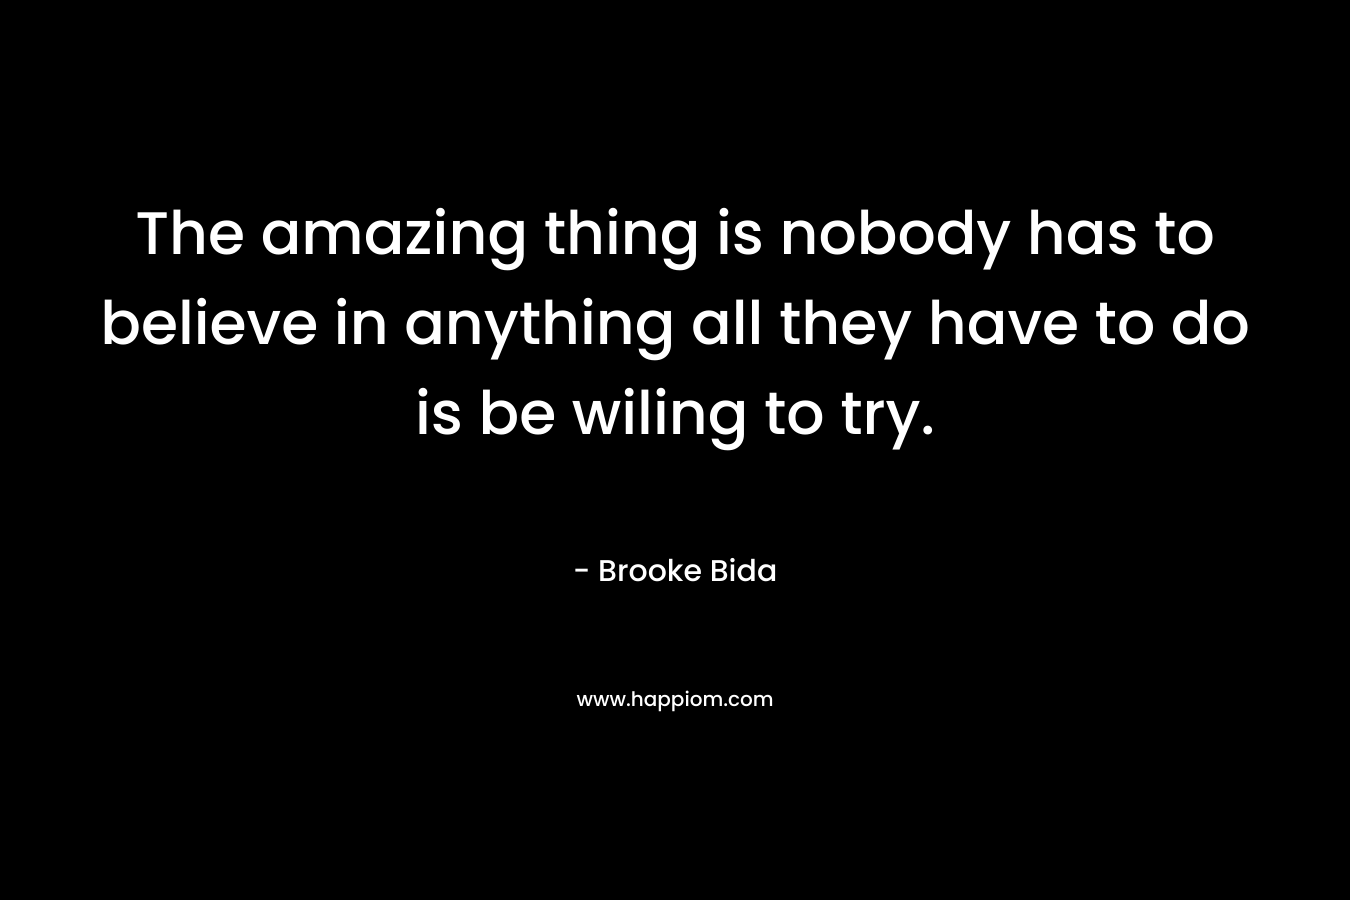 The amazing thing is nobody has to believe in anything all they have to do is be wiling to try. – Brooke Bida